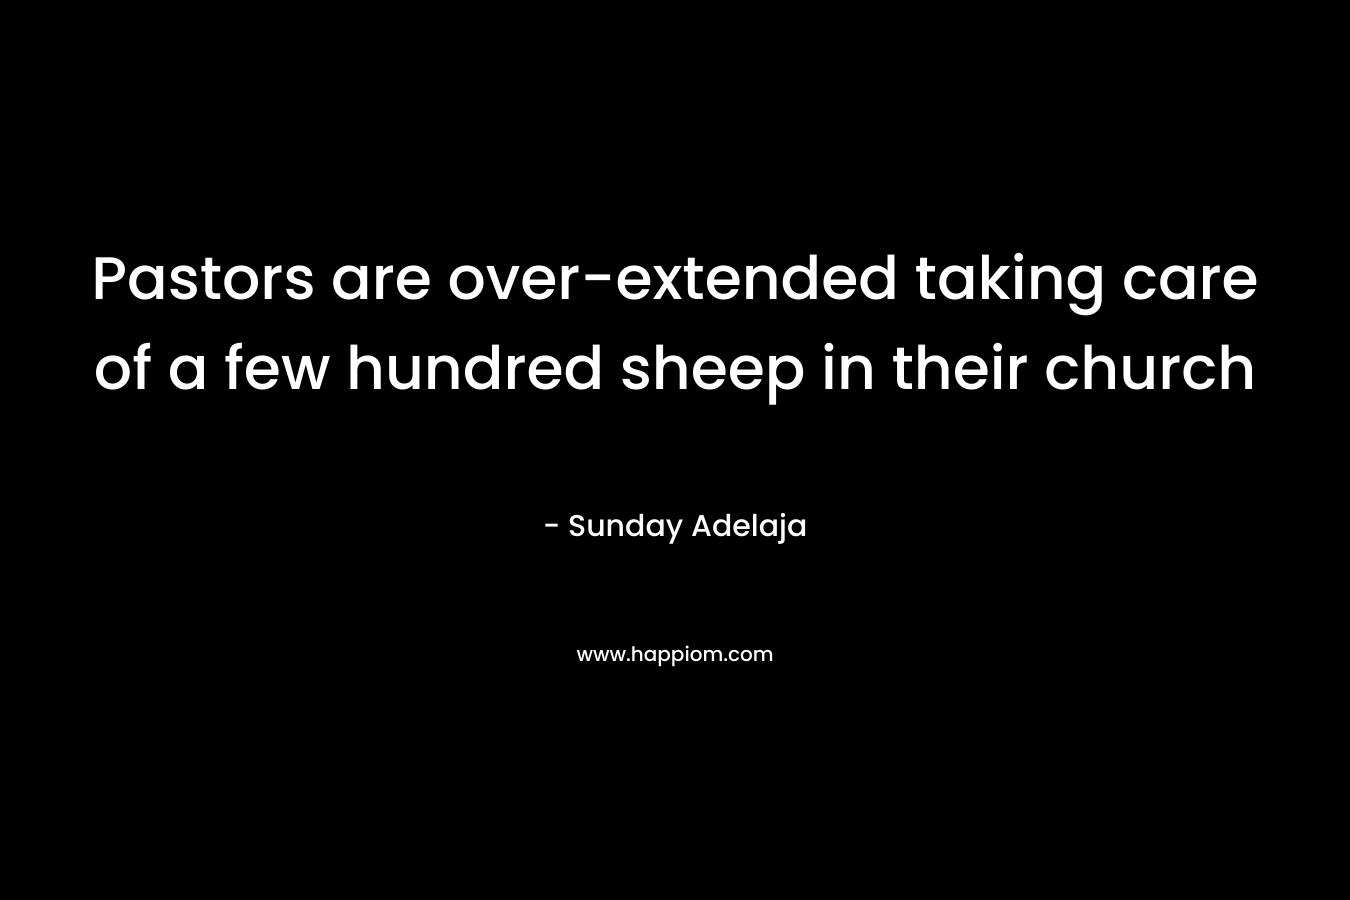 Pastors are over-extended taking care of a few hundred sheep in their church